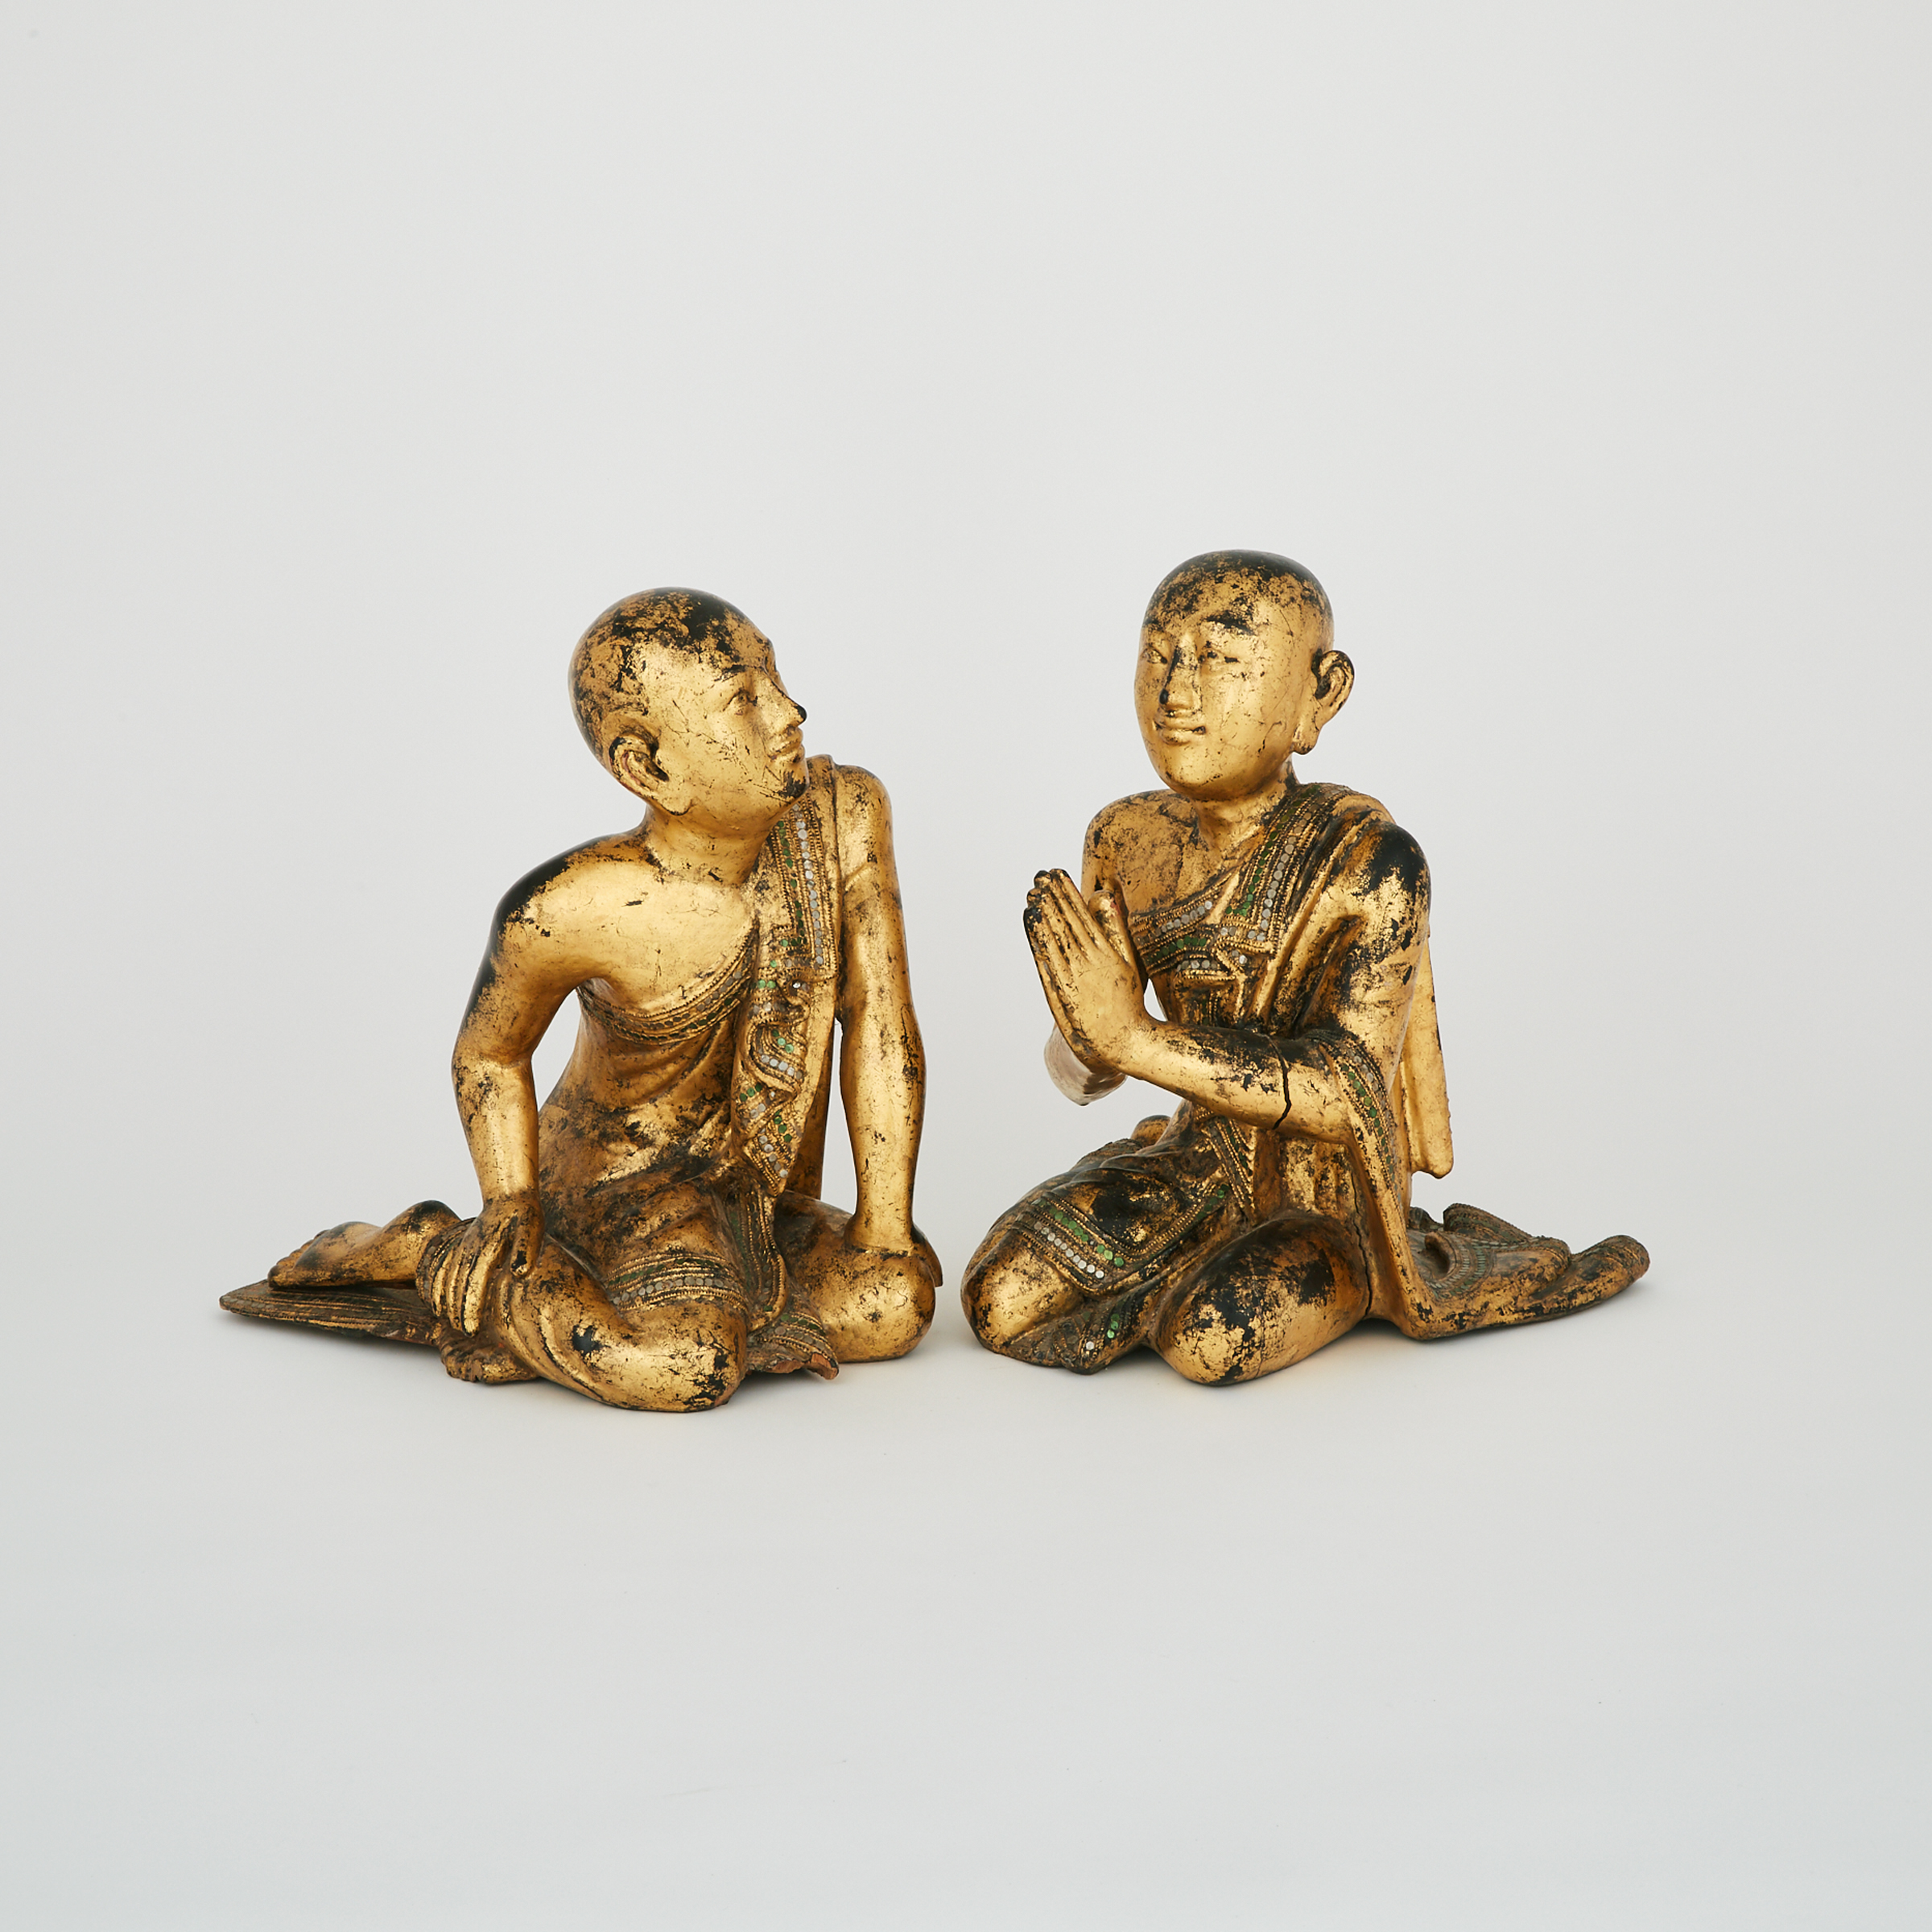 A Pair of Gilt Lacquer Monks, Mandalay Period, Burma, 19th Century